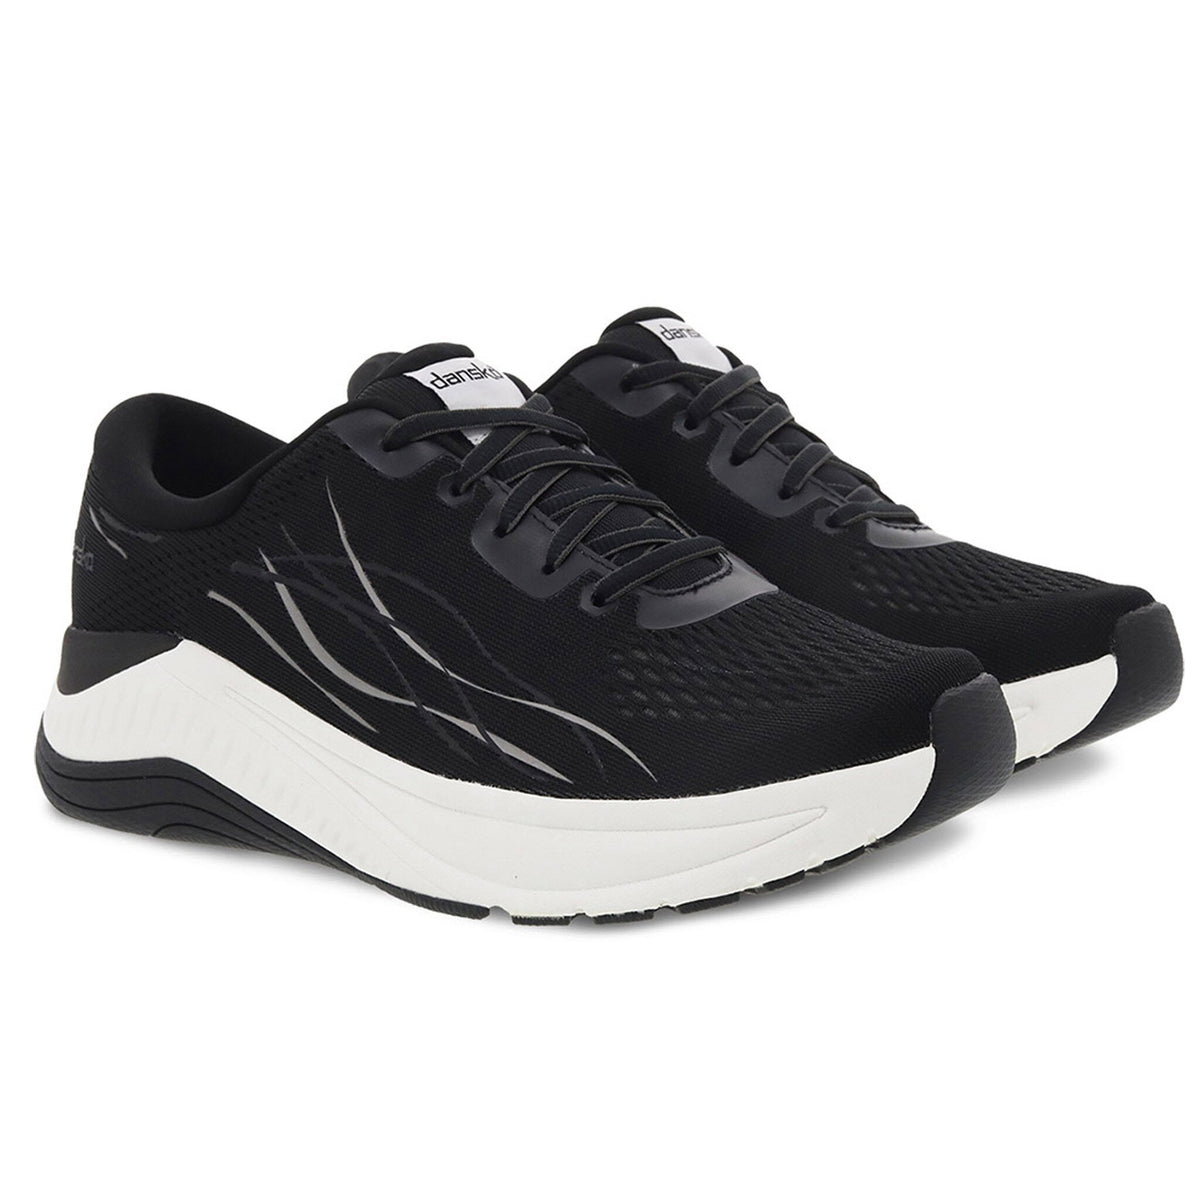 A pair of black and white Dansko Pace Black Mesh walking shoes with odor control on a white background.